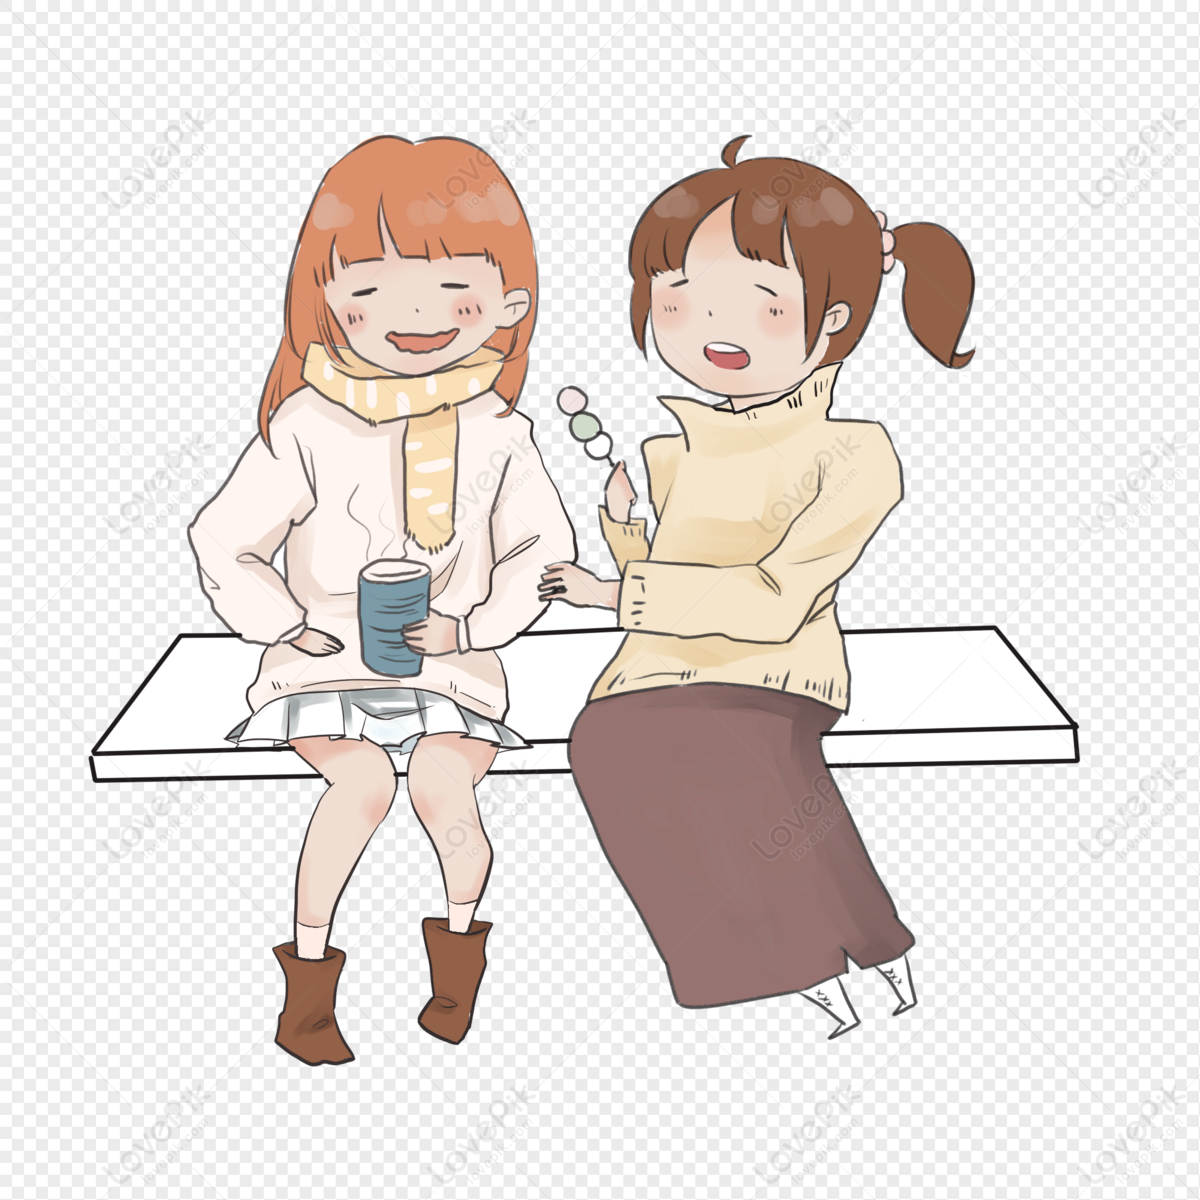 Two Girls Having Fun Talking PNG Image And Clipart Image For Free Download  - Lovepik | 401143618